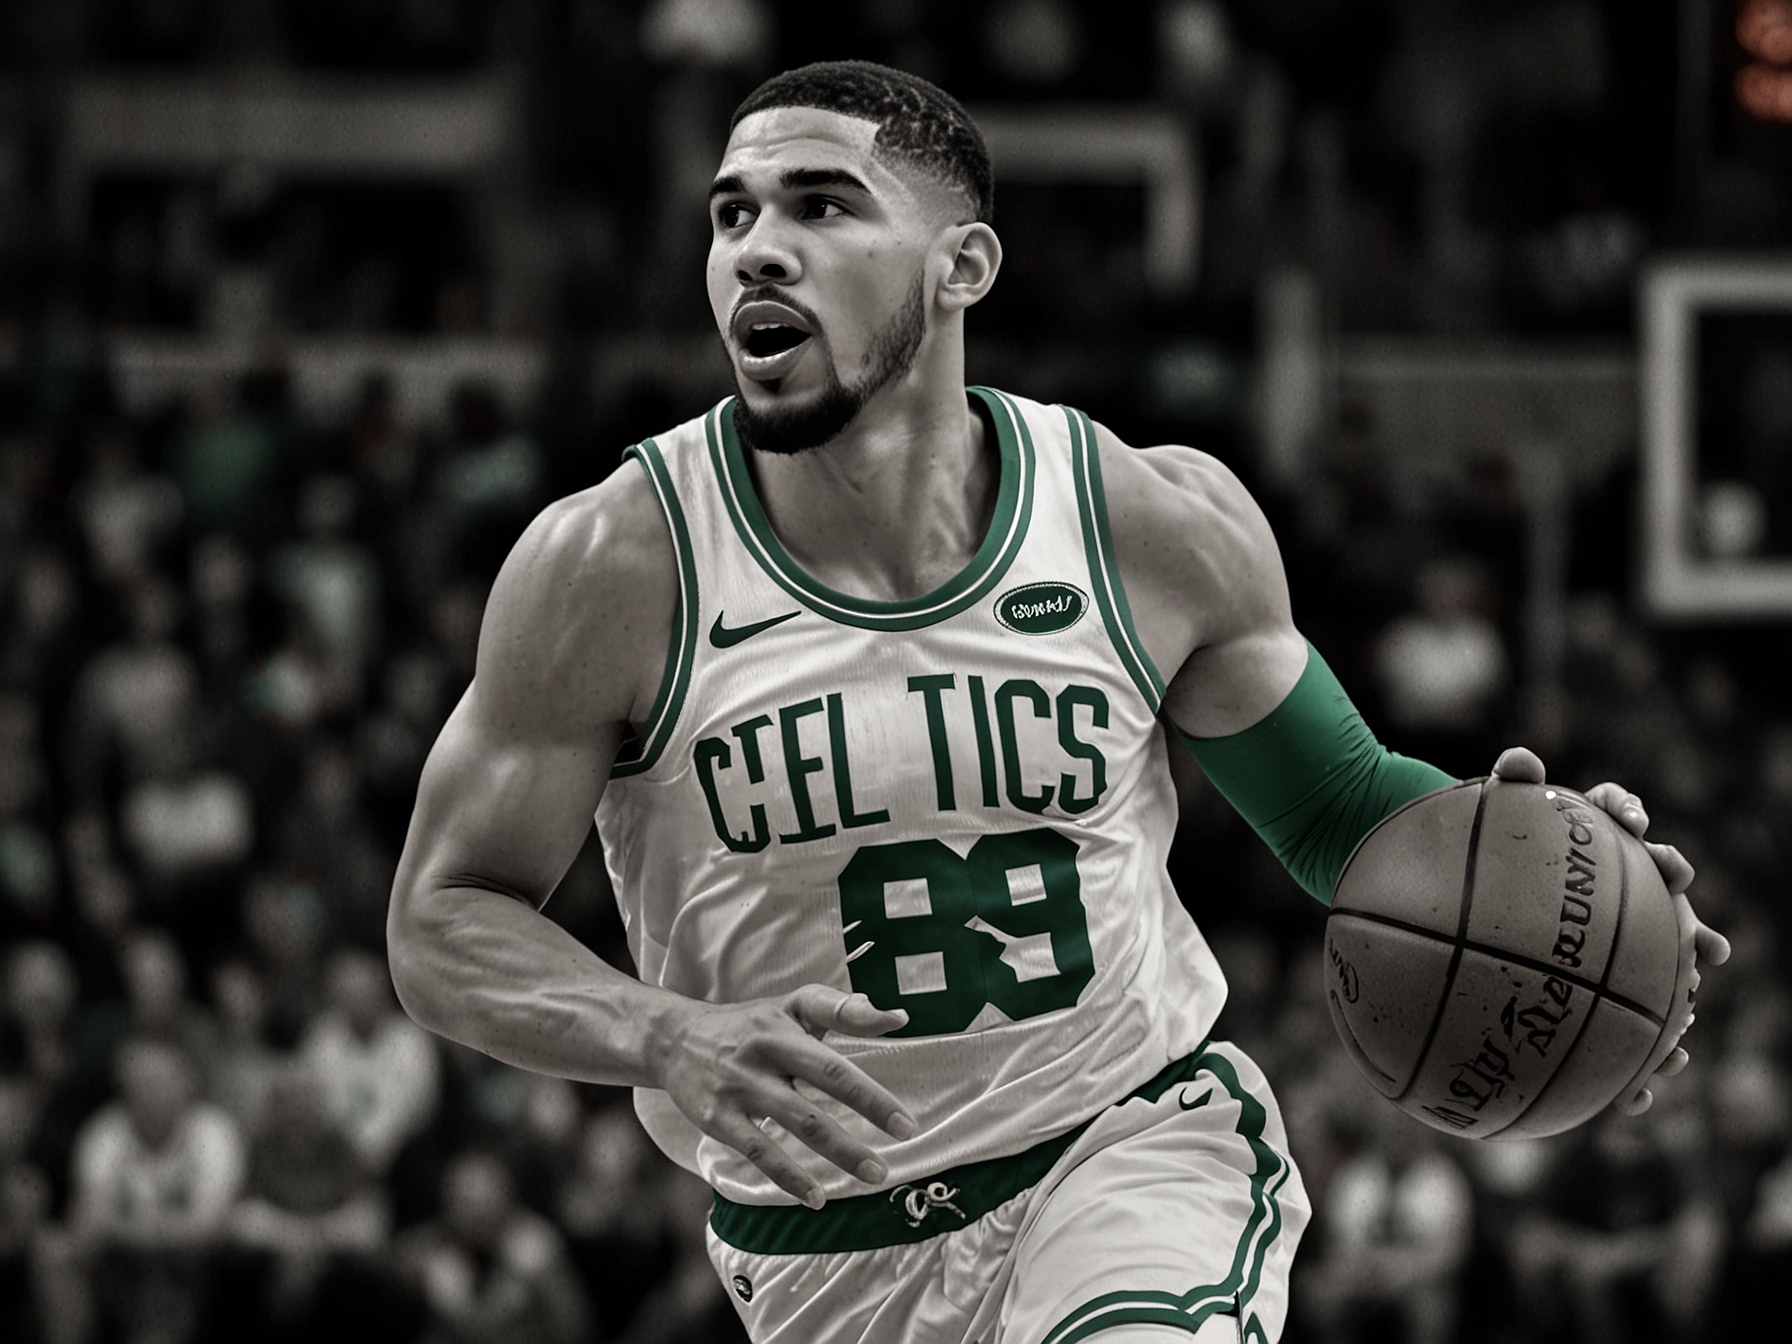 Jayson Tatum drives towards the basket with determination, showcasing his scoring and playmaking abilities that led to his standout performance in the Celtics' Game 5 victory.